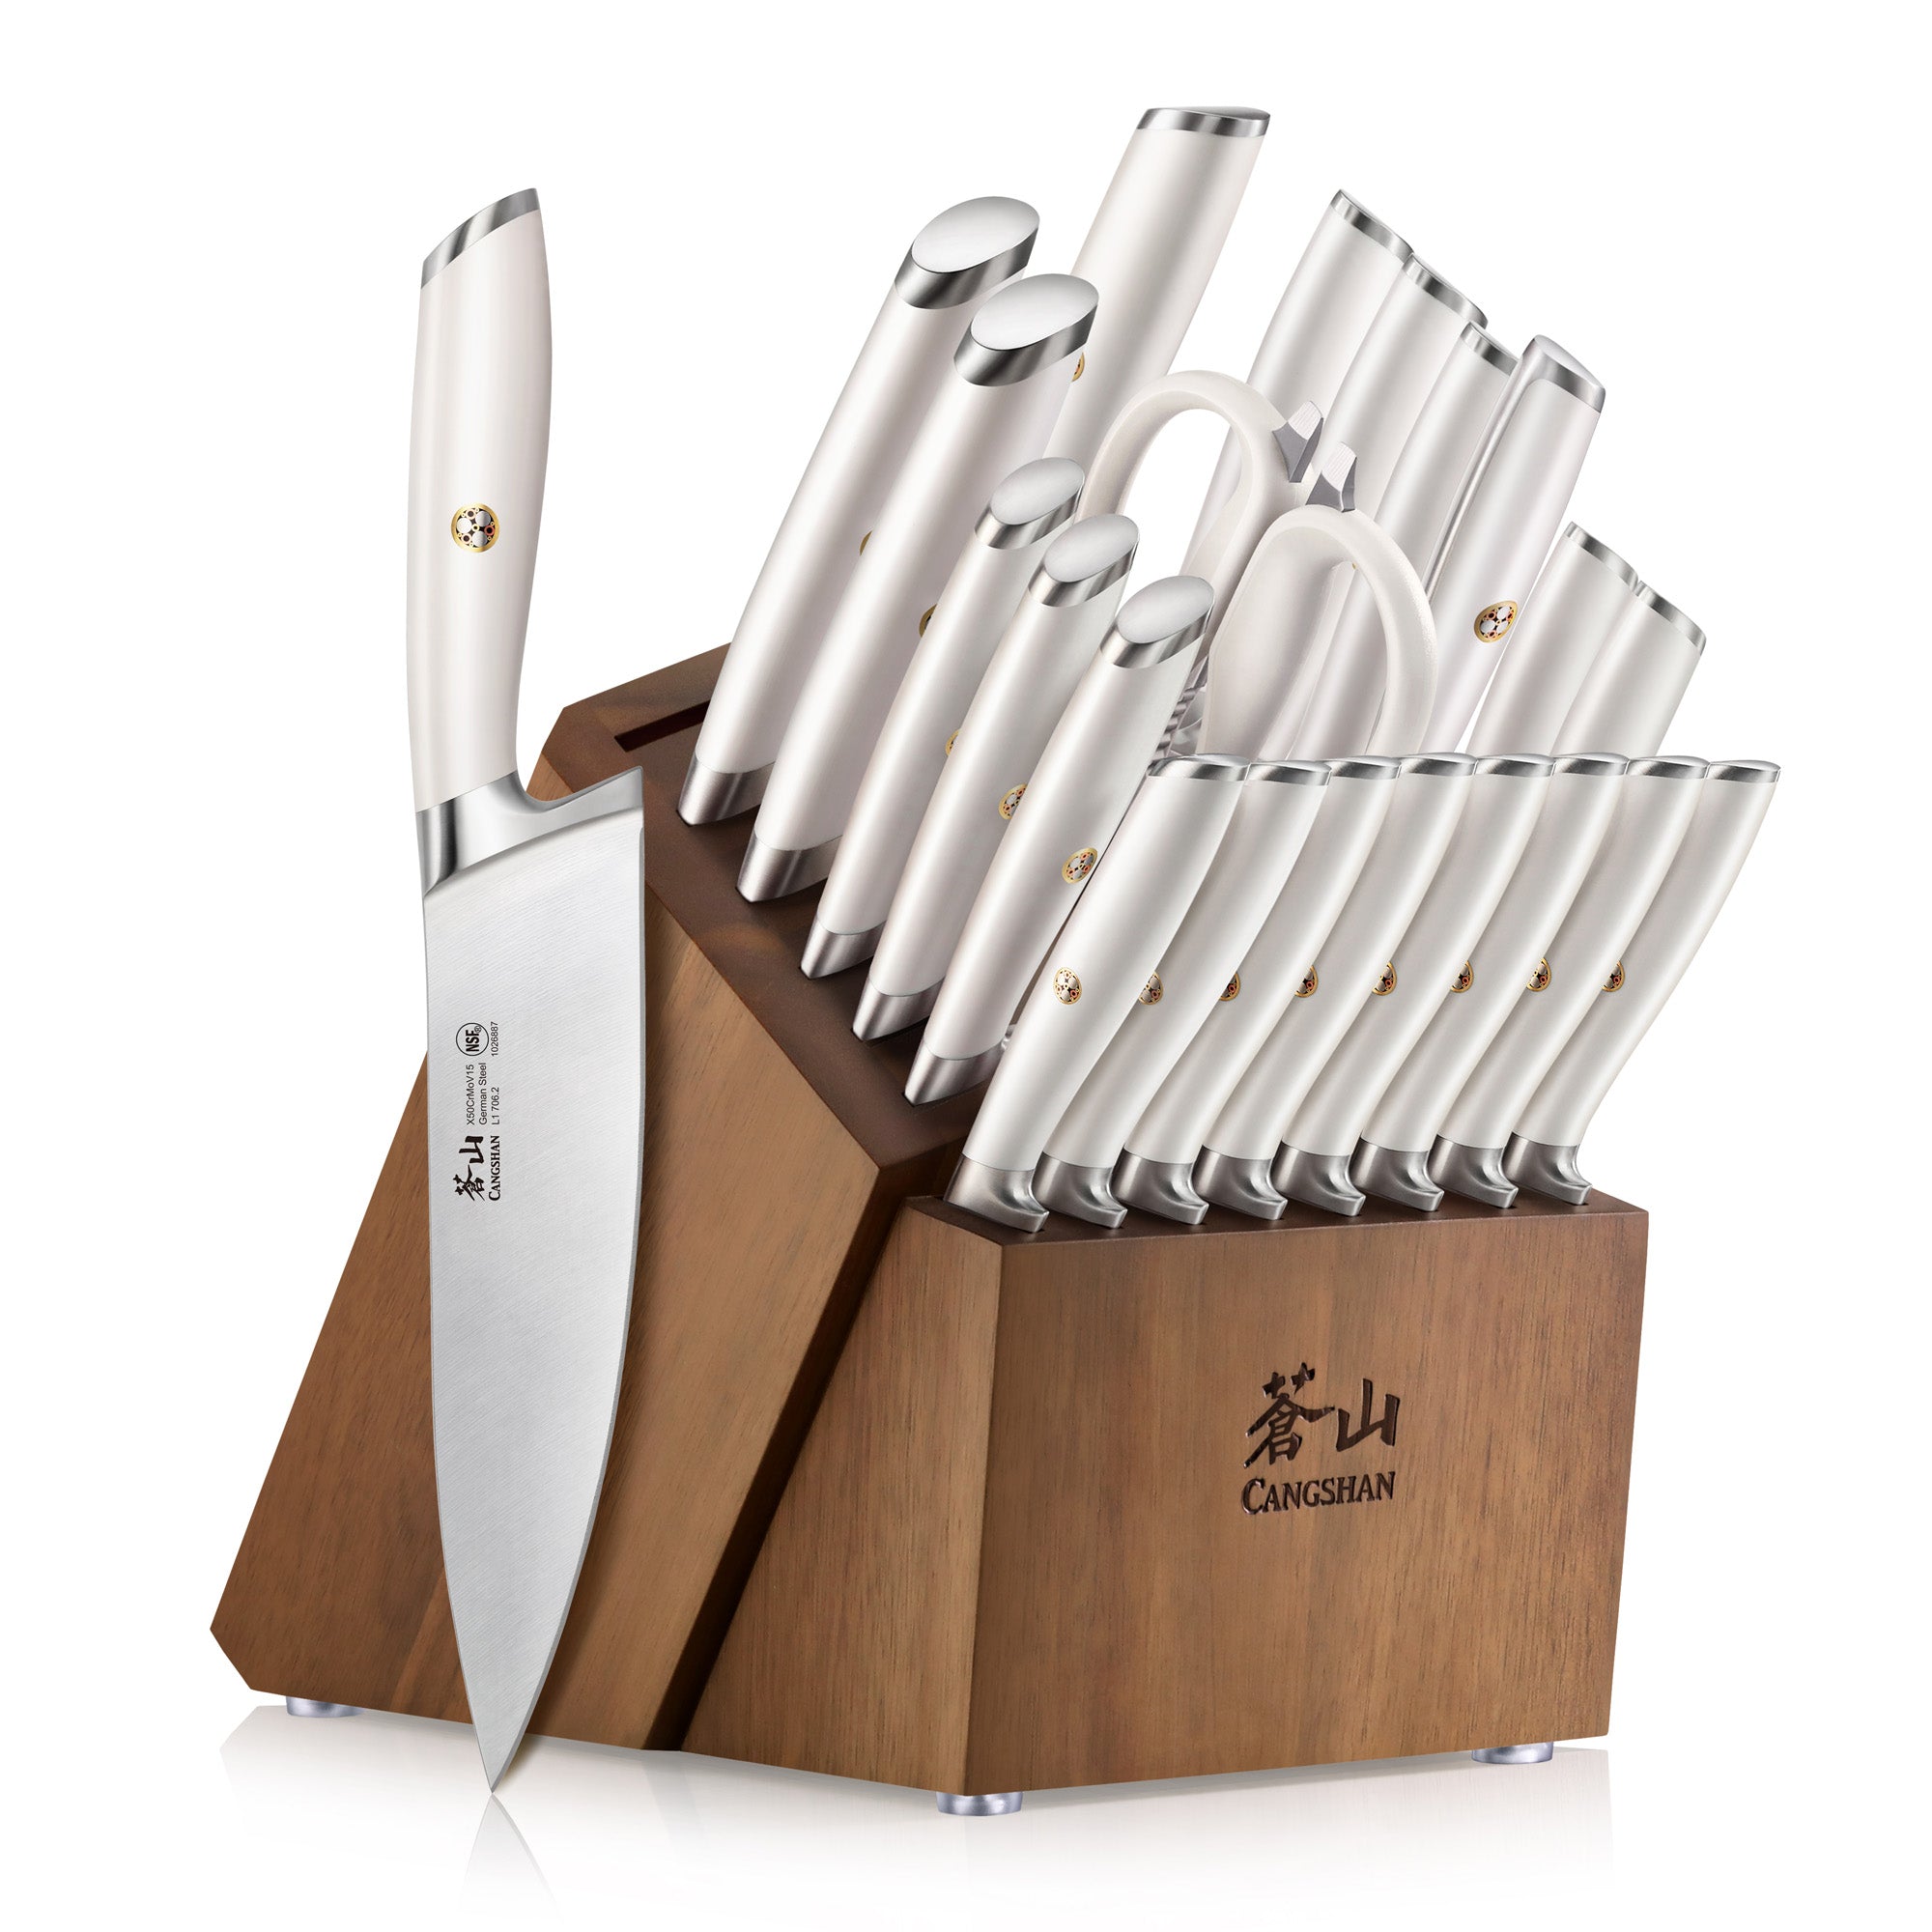 Cangshan L1 Series 1026962 German Steel Forged 2-Piece Carving Set, White 